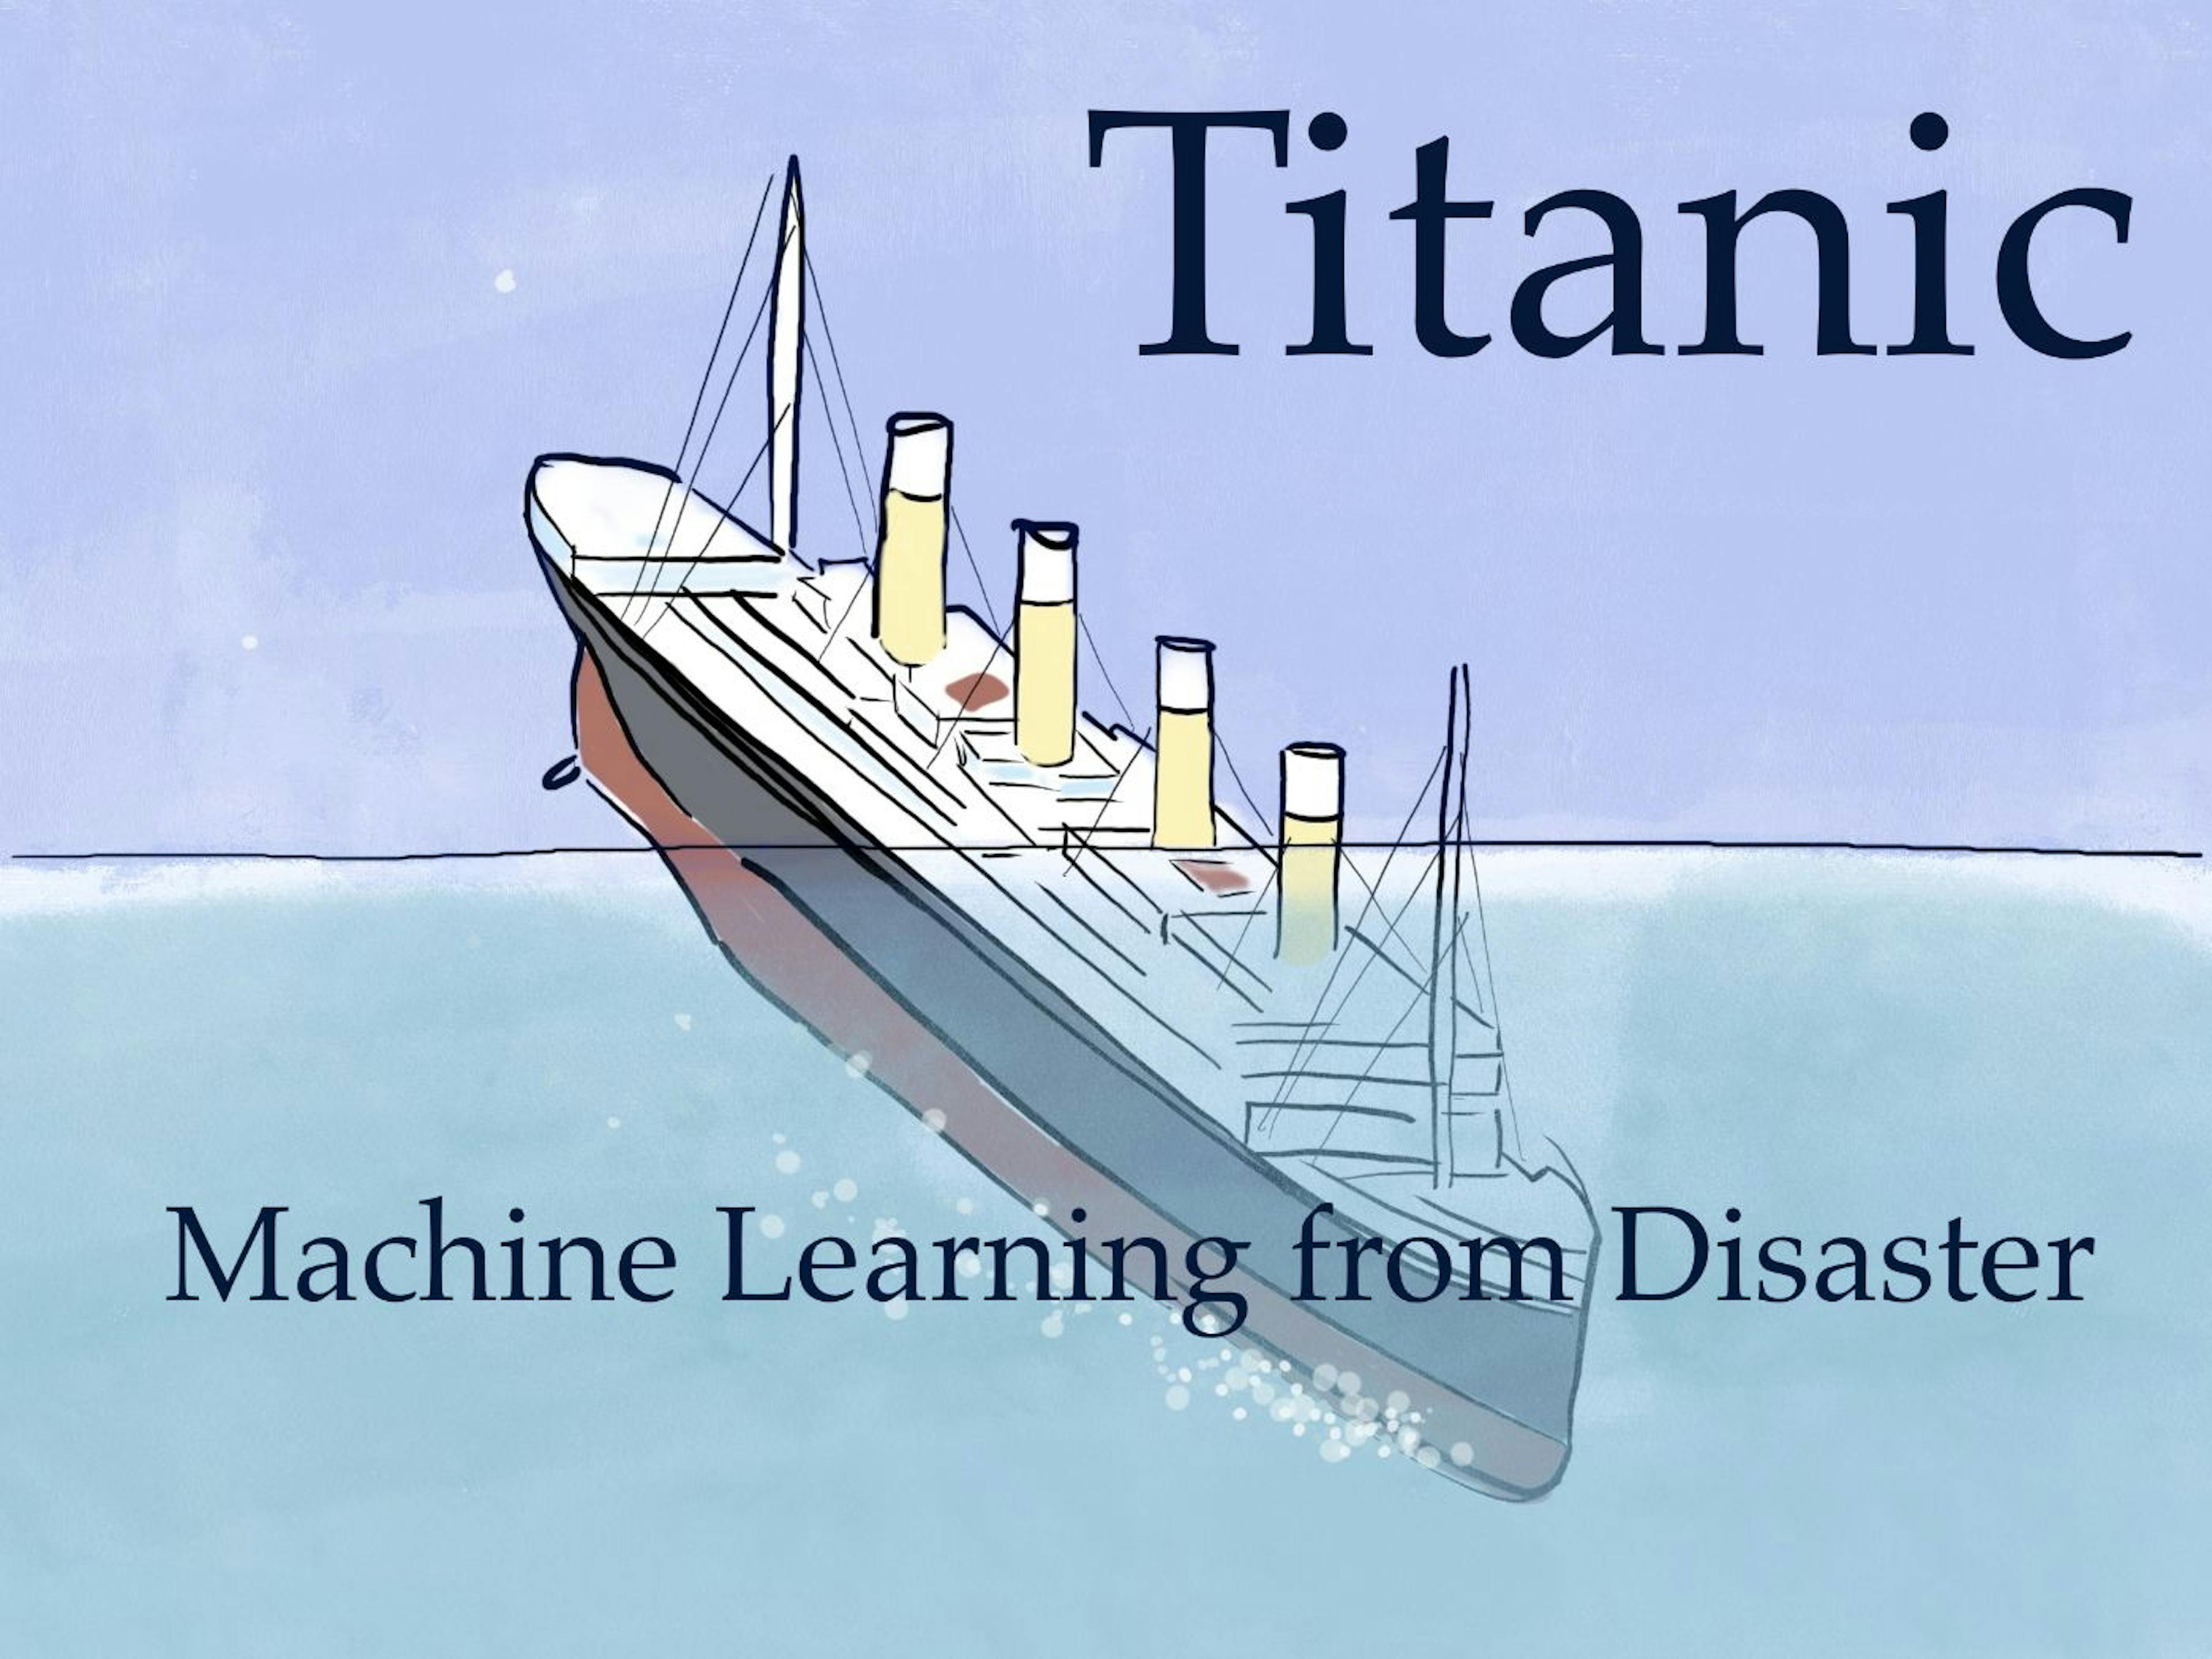 /exploratory-data-analysis-using-data-from-the-titanic feature image